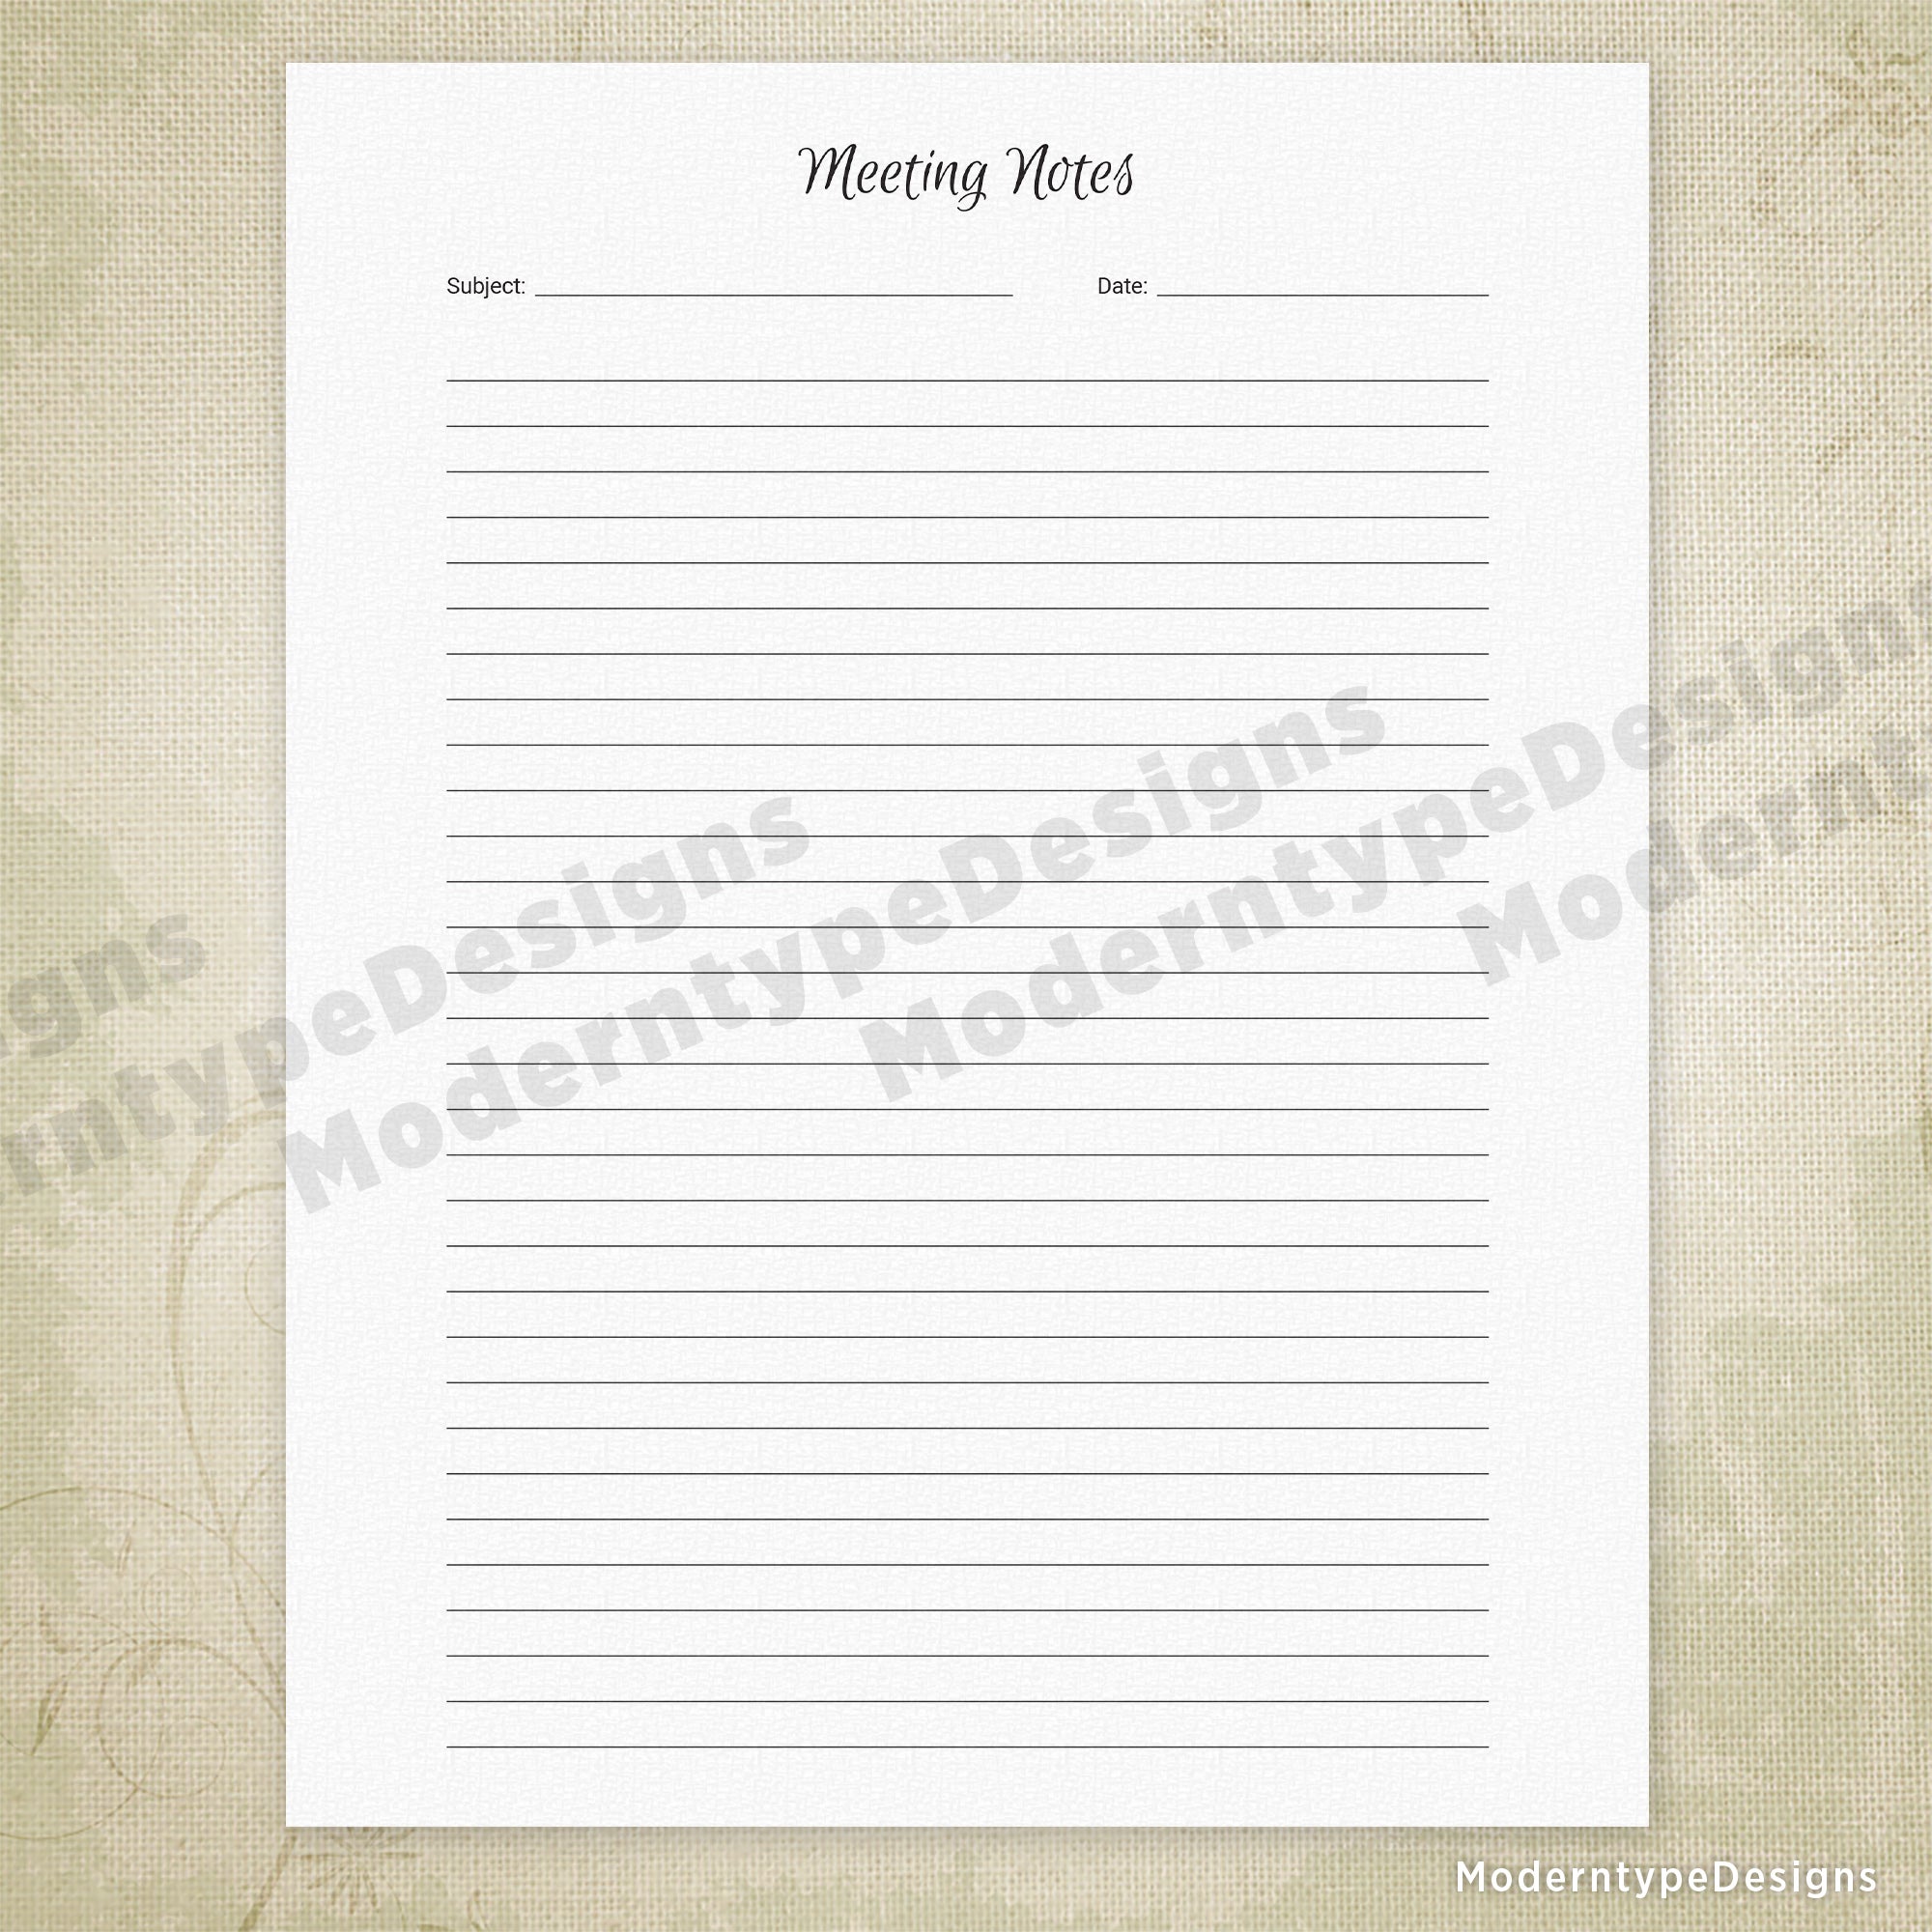 Meeting Notes Simple Planner Printable for Binding